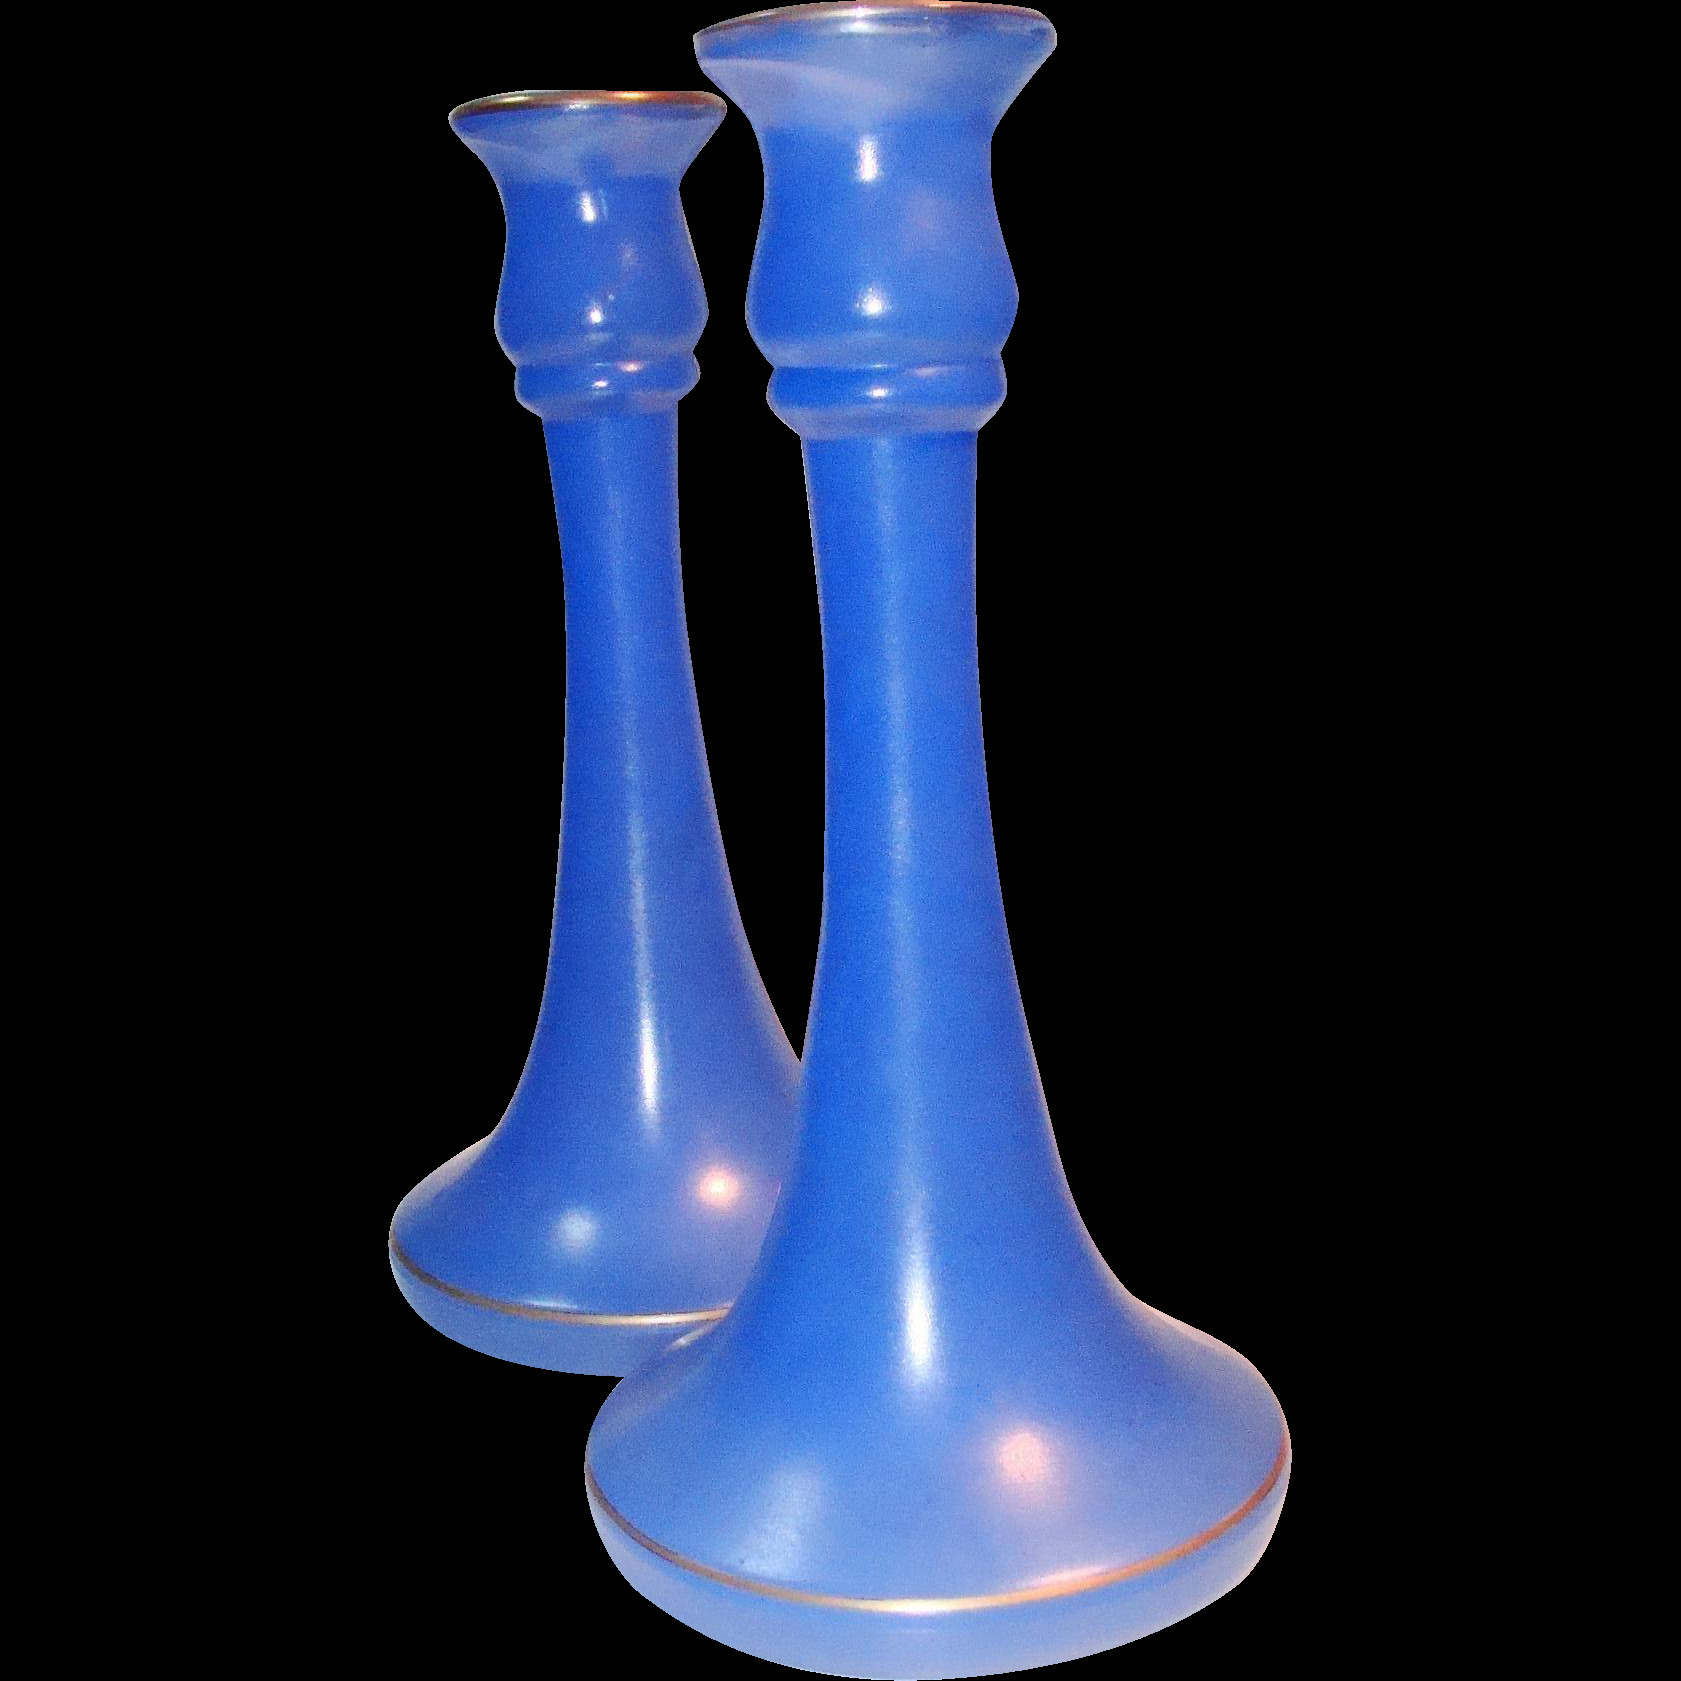 18 Trendy Vintage Colored Glass Vases 2024 free download vintage colored glass vases of cool blue frosted glass candlesticks pair 9 tall intended for cool blue glass candlesticks a pair to use on your table to make you at least feel cool in summer